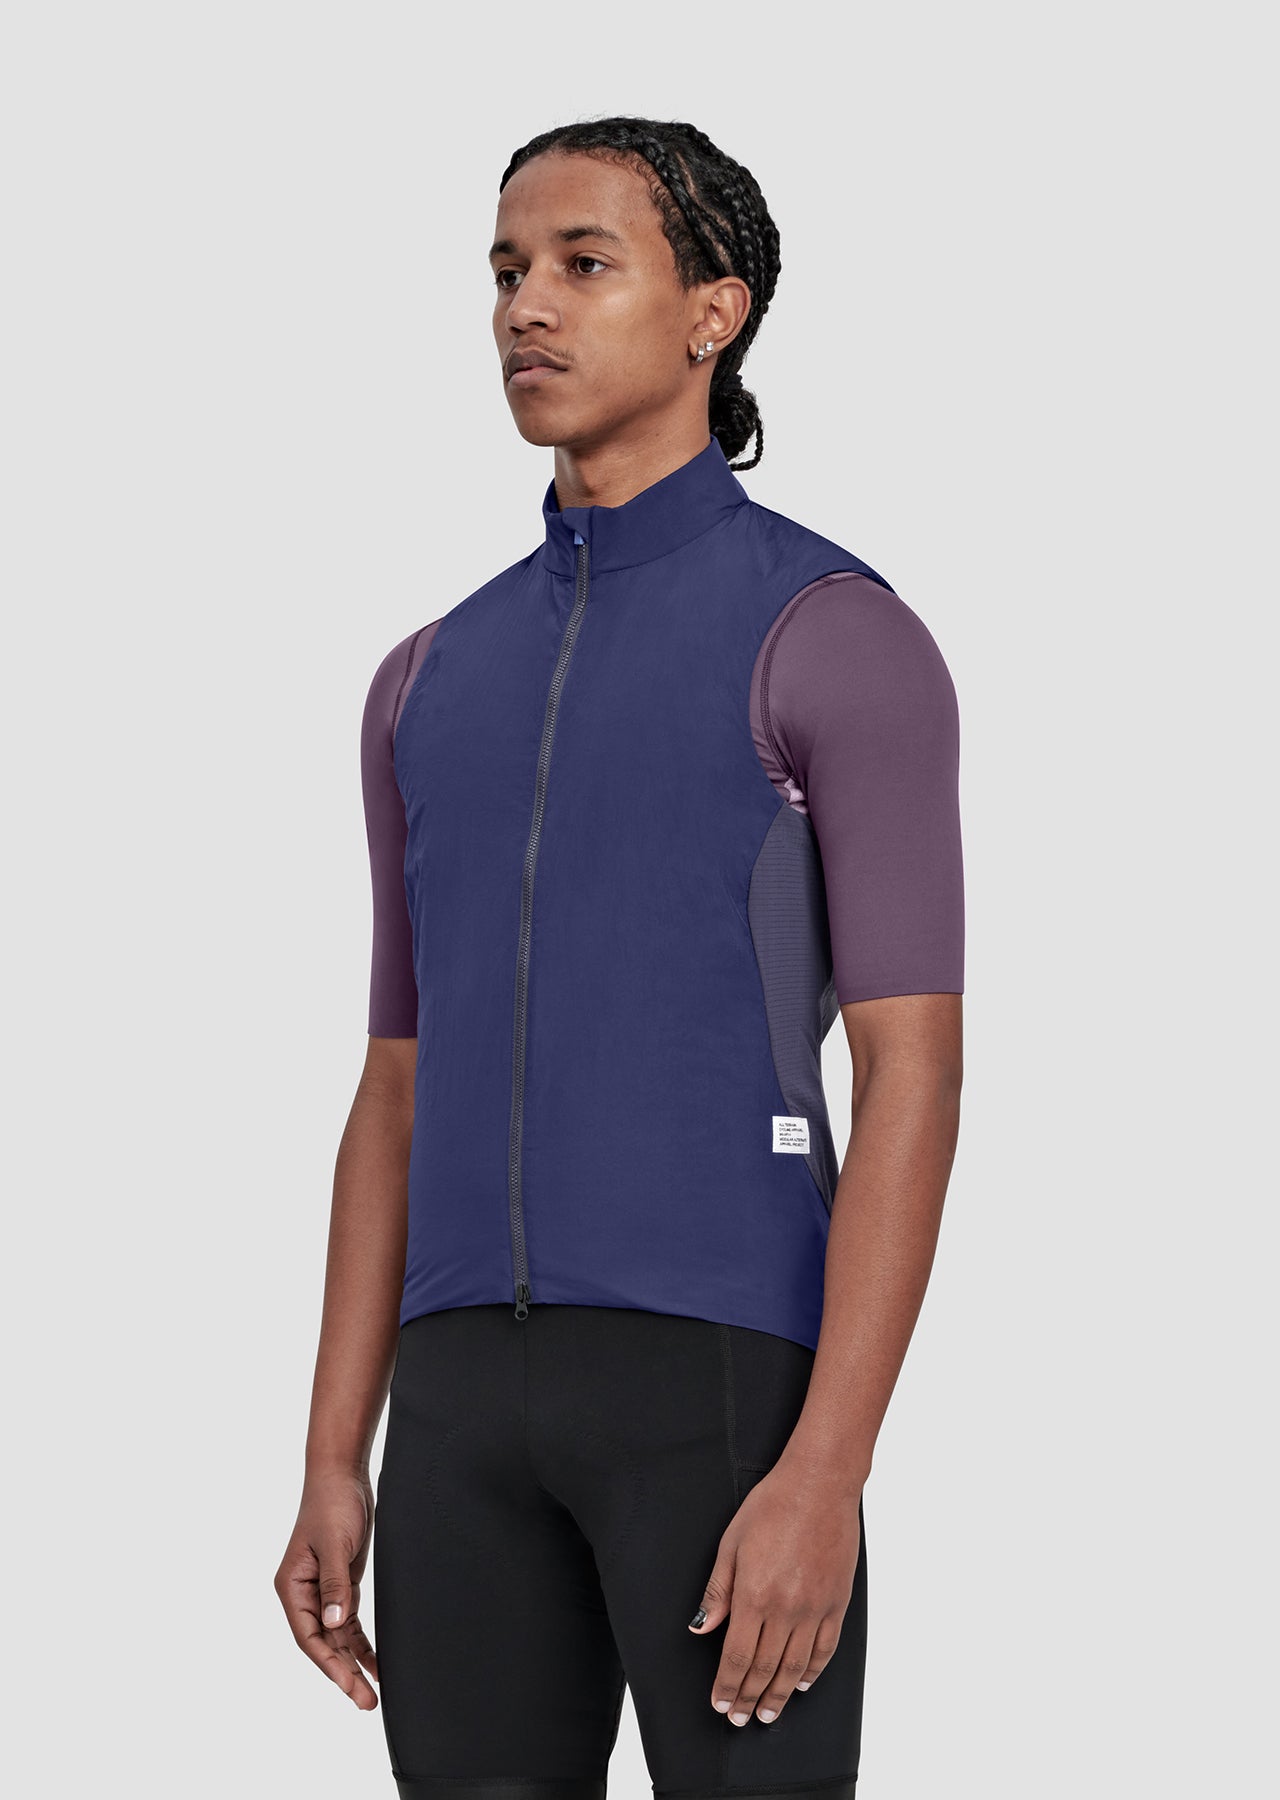 Alt_Road Thermal Vest - MAAP Cycling Apparel